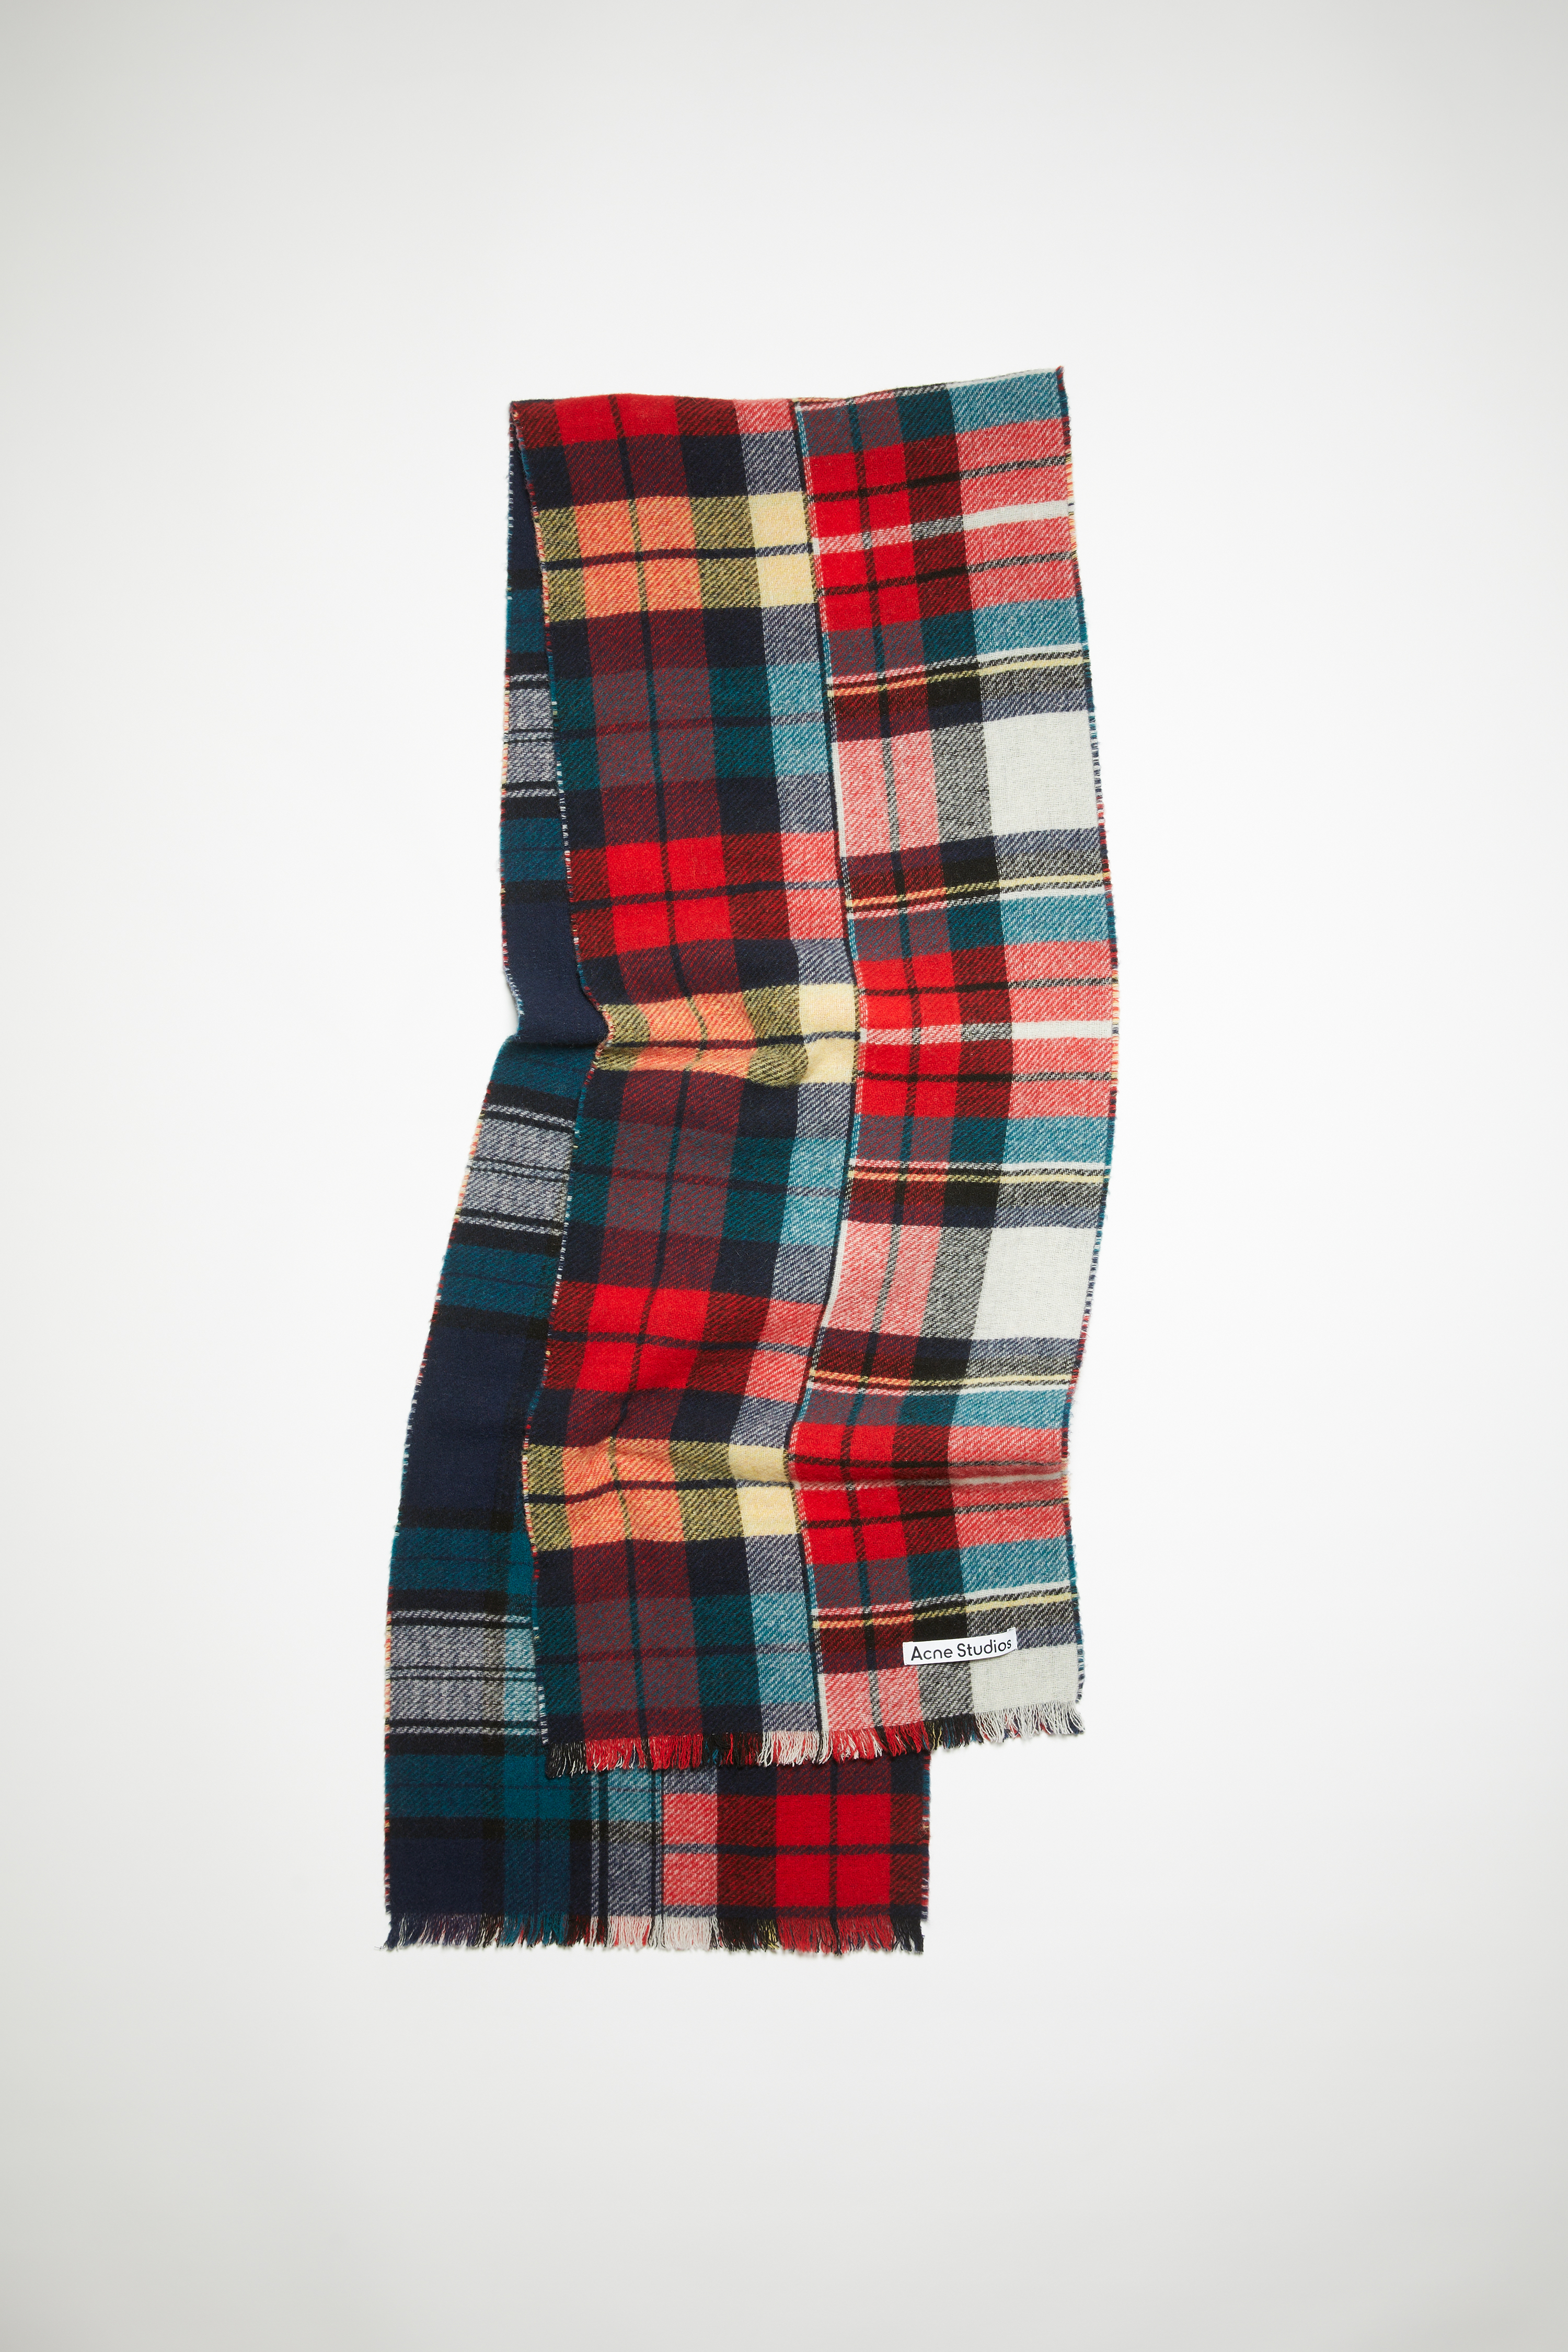 ACNE STUDIOS ACNE STUDIOS FN-UX-SCAR000294 RED/BLUE/WHITE MIXED CHECK WOOL SCARF